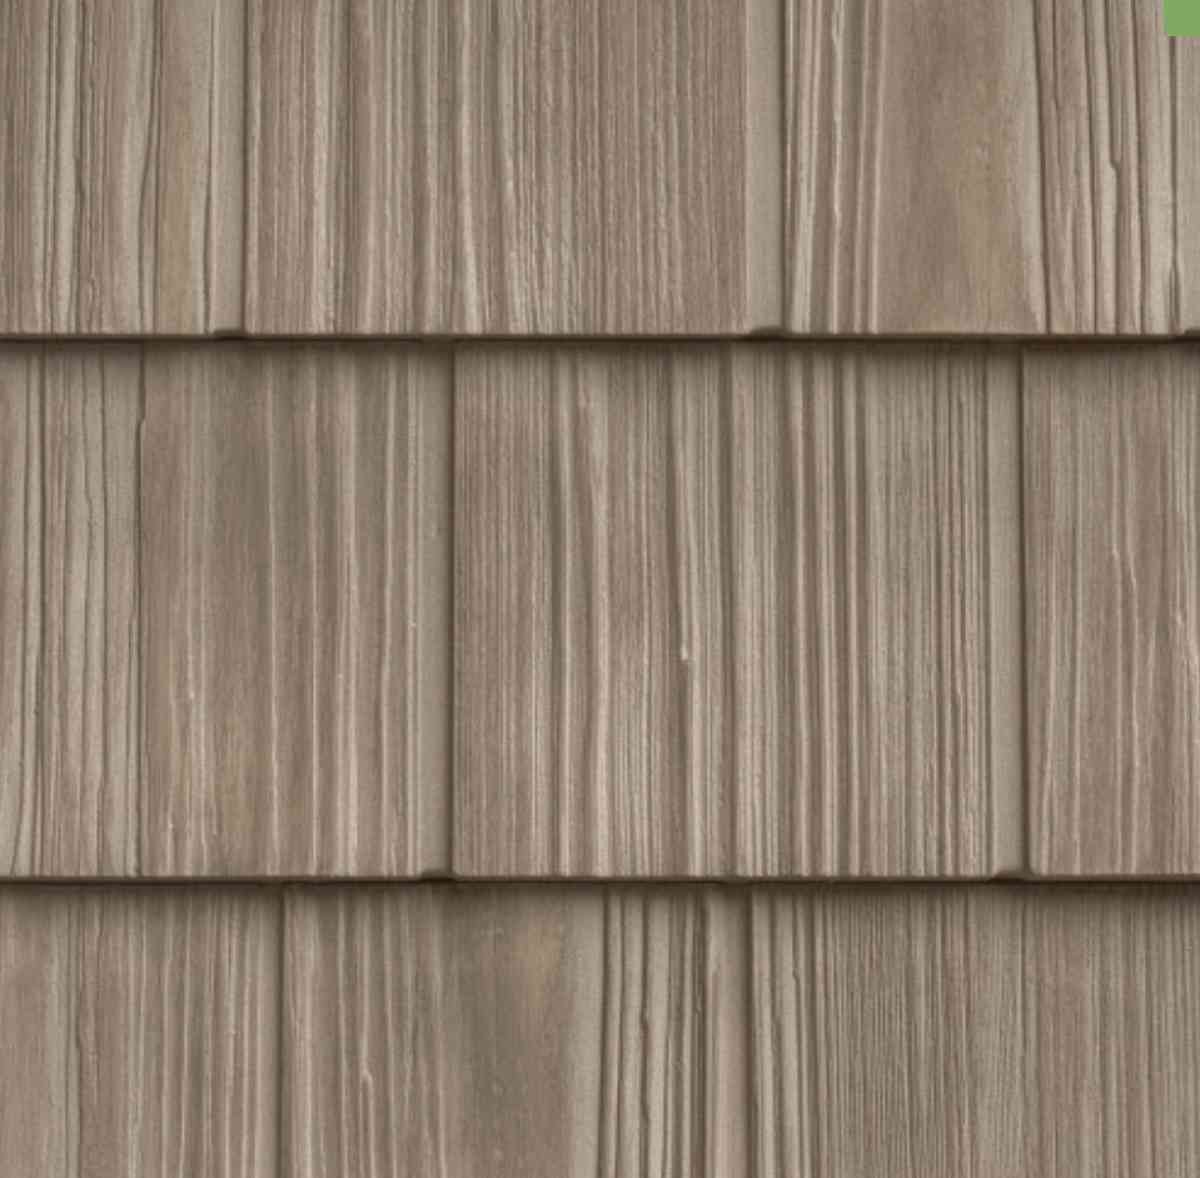 7 in X 5 ft staggered wood shake vinyl siding